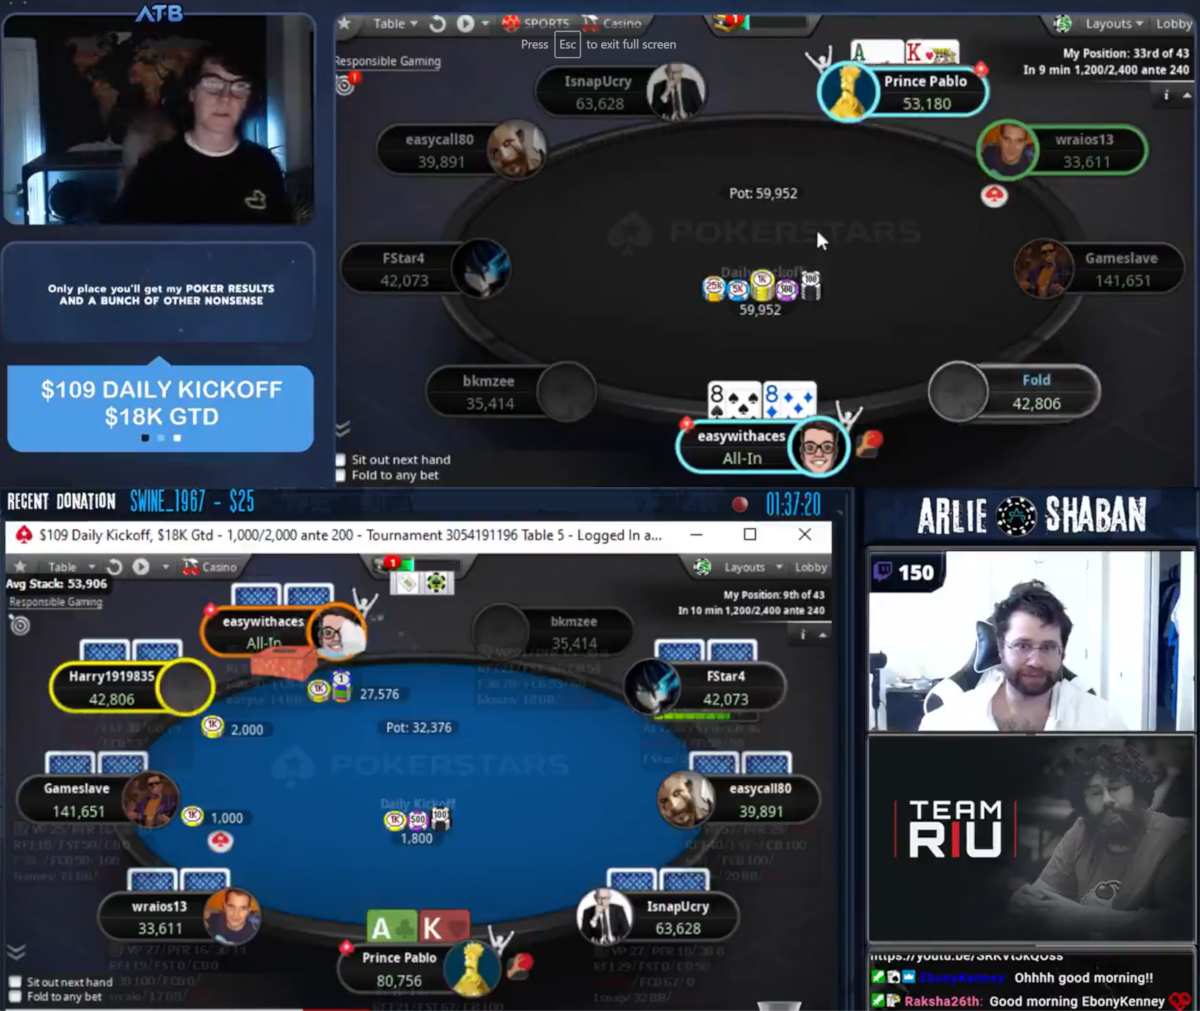 Fintan Hand and Arlie Shaban Clash On The Bubble While Both Streaming The PokerStars $109 Daily Kickoff